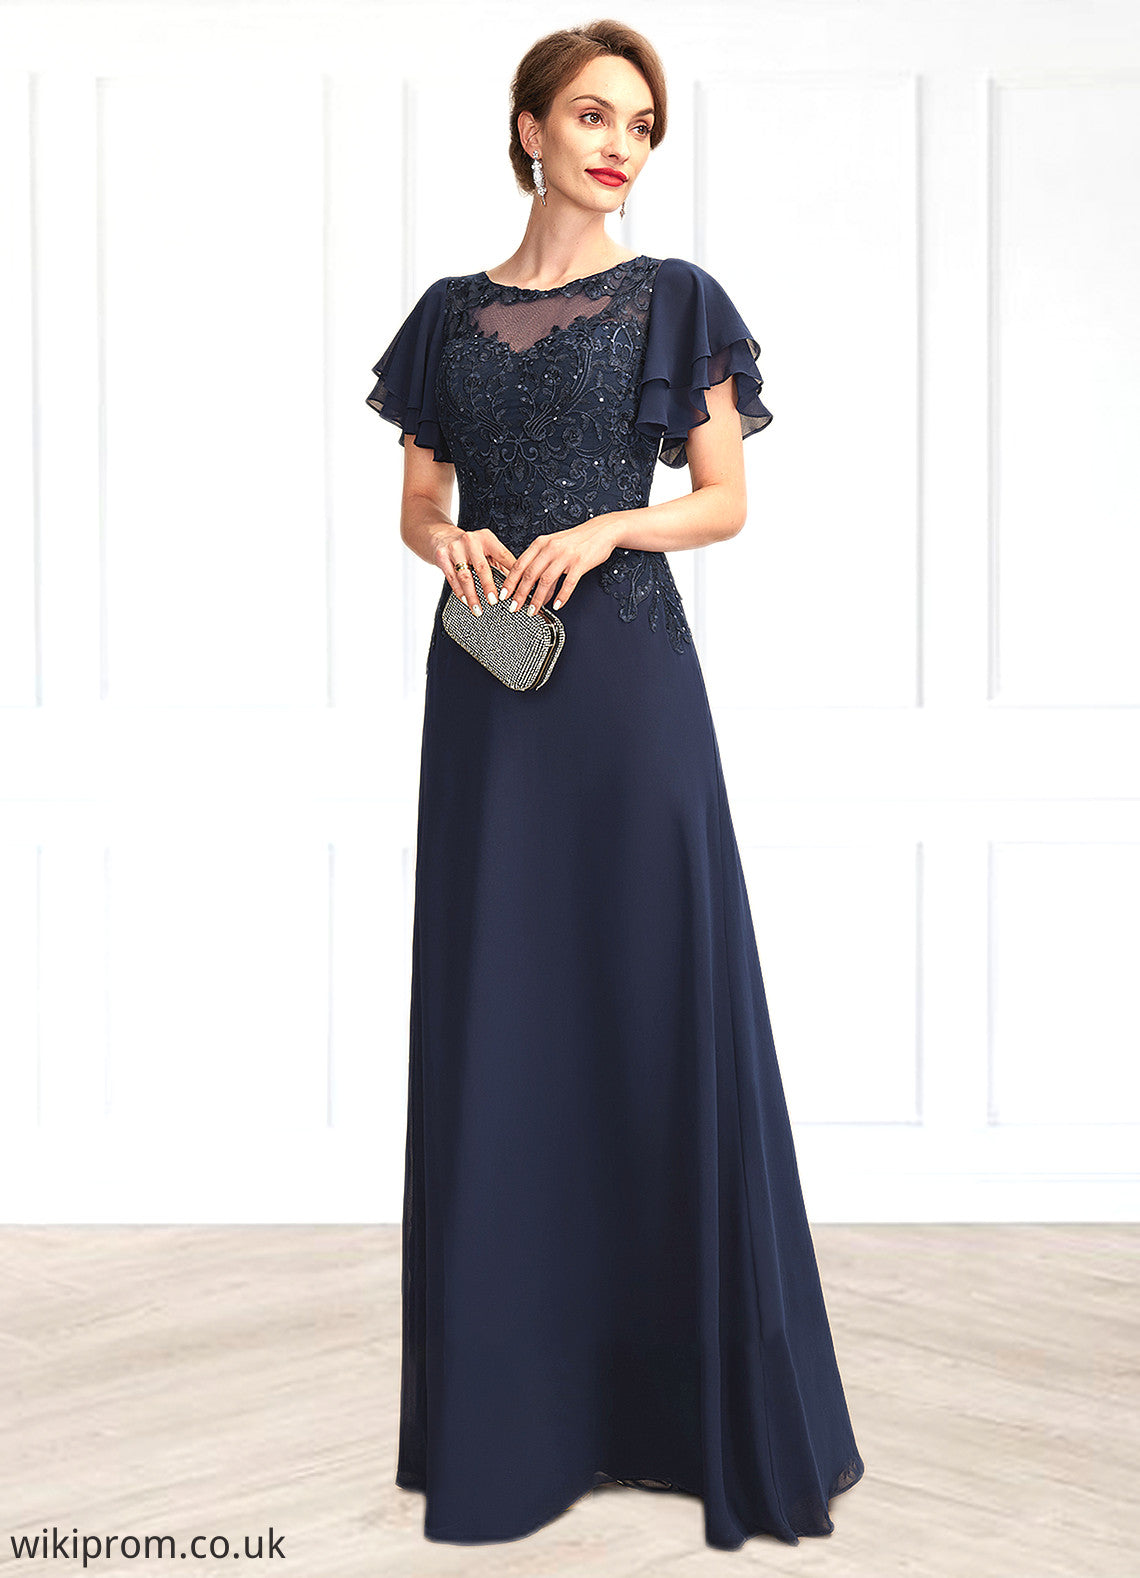 Christina A-Line Scoop Neck Floor-Length Chiffon Lace Mother of the Bride Dress With Sequins SWK126P0014857